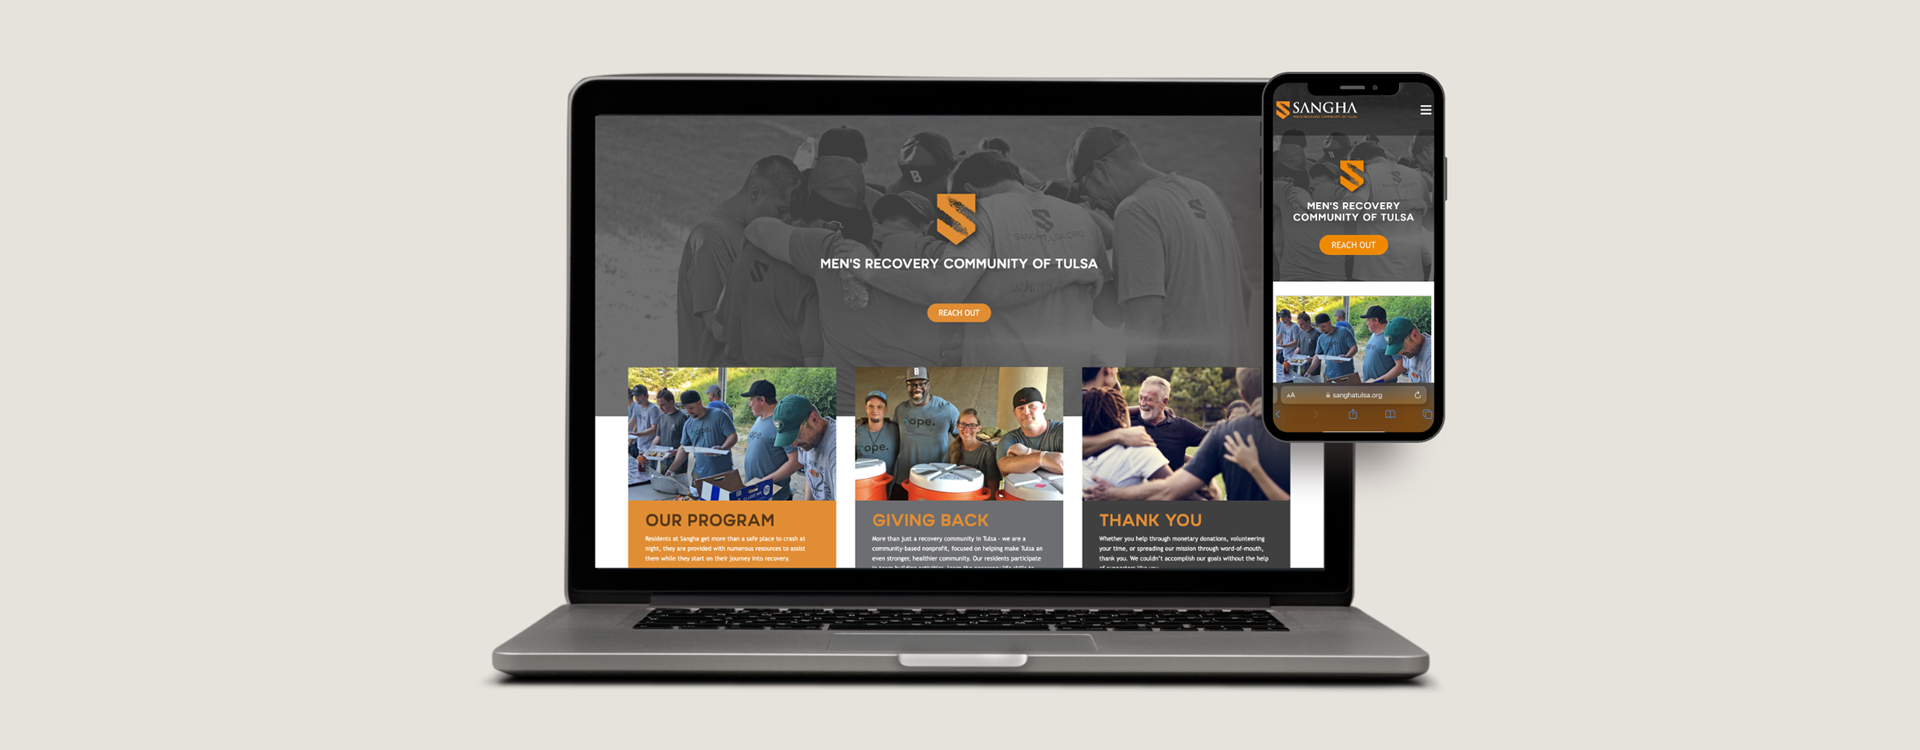 Mock-up of website for Sangha Men's Recovery Community designed by AcrobatAnt.